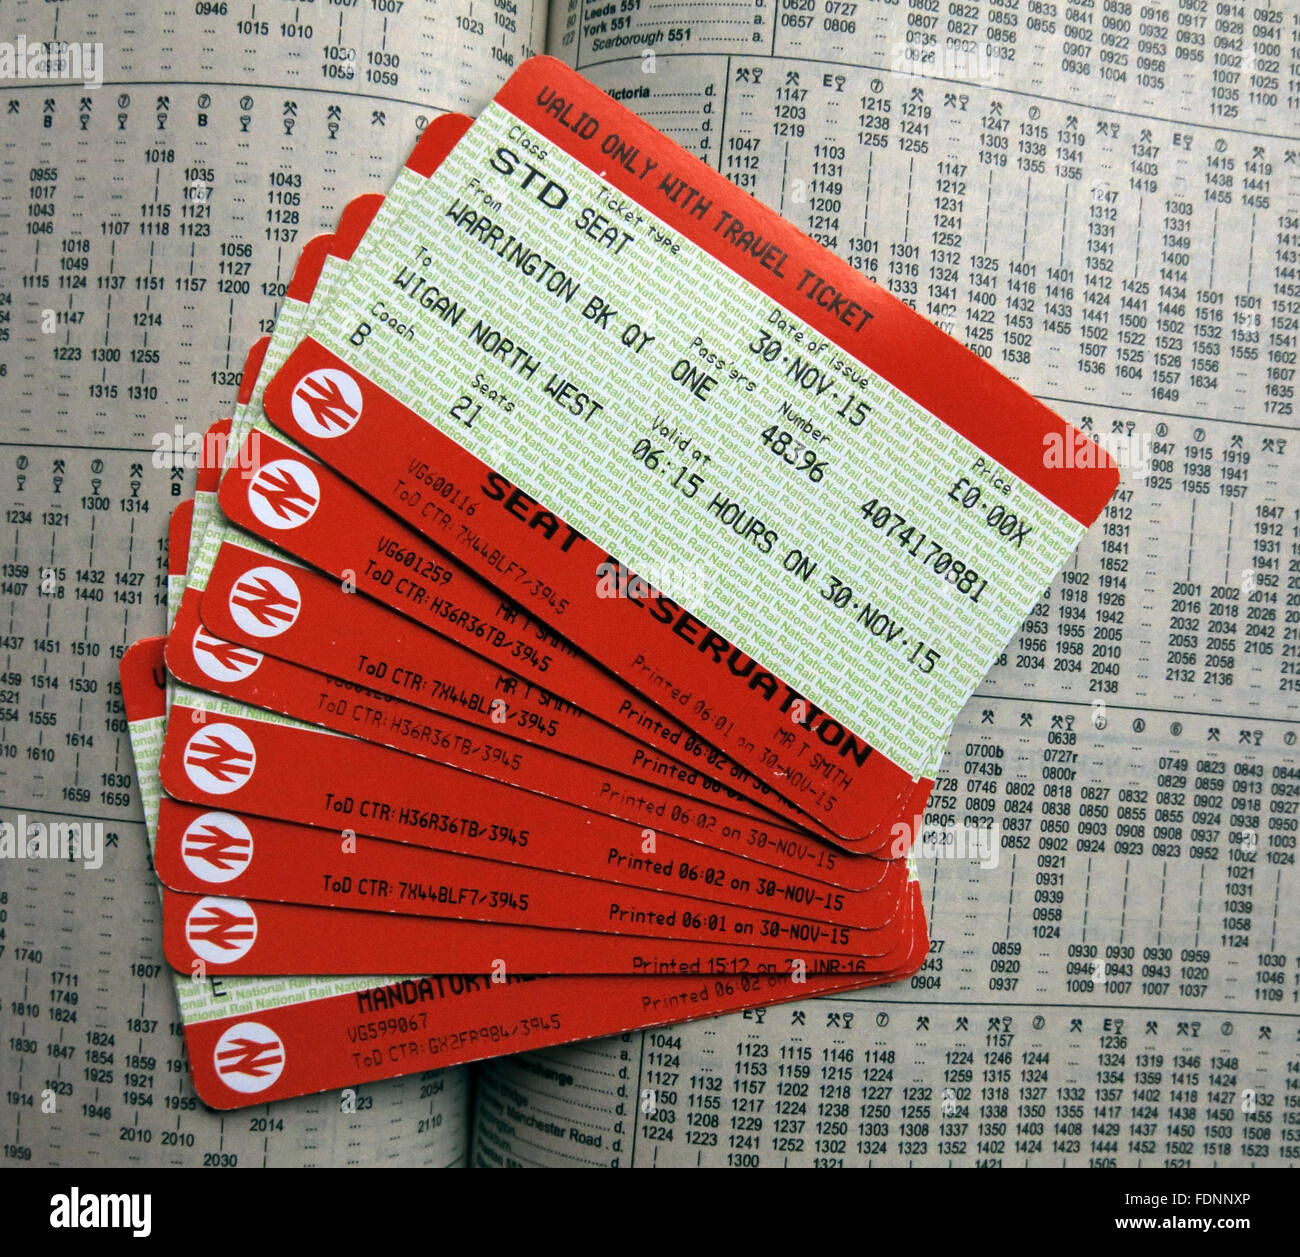 British Rail Tickets on a timetable,England,UK Stock Photo